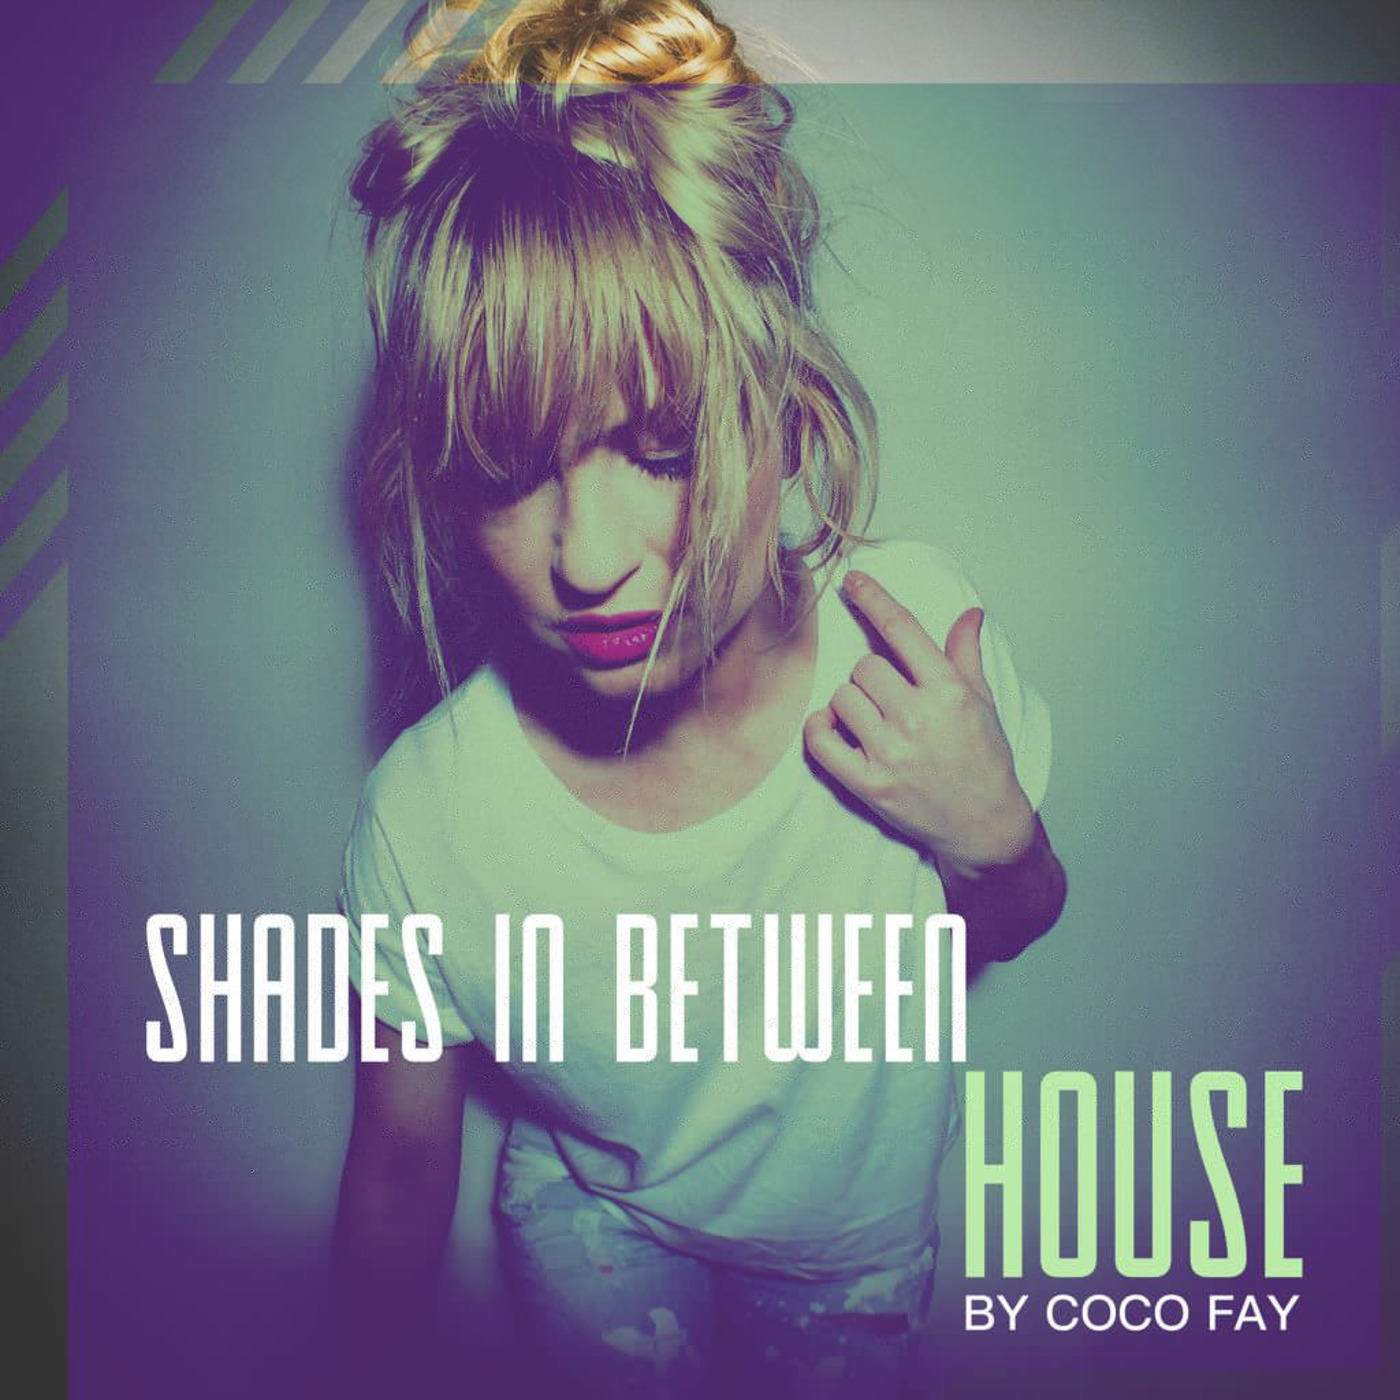 Shades of House #008 by Coco Fay